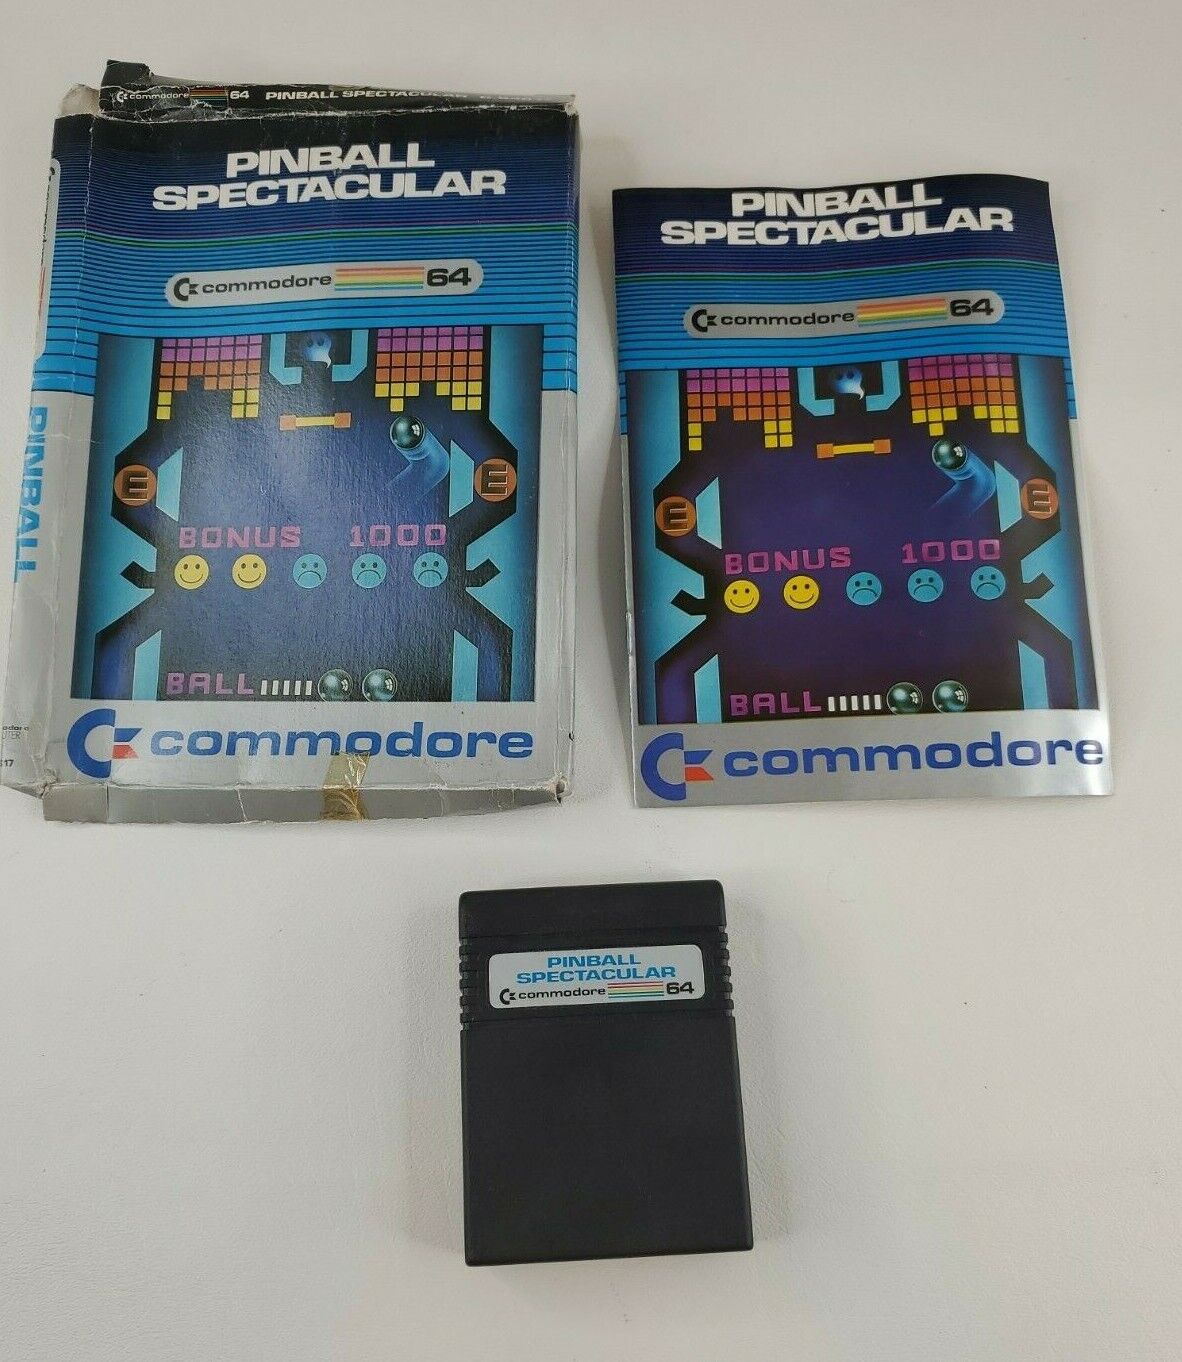 Vintage 1983 Pinball Spectacular Commodore 64 Game with Manual & Box - untested 